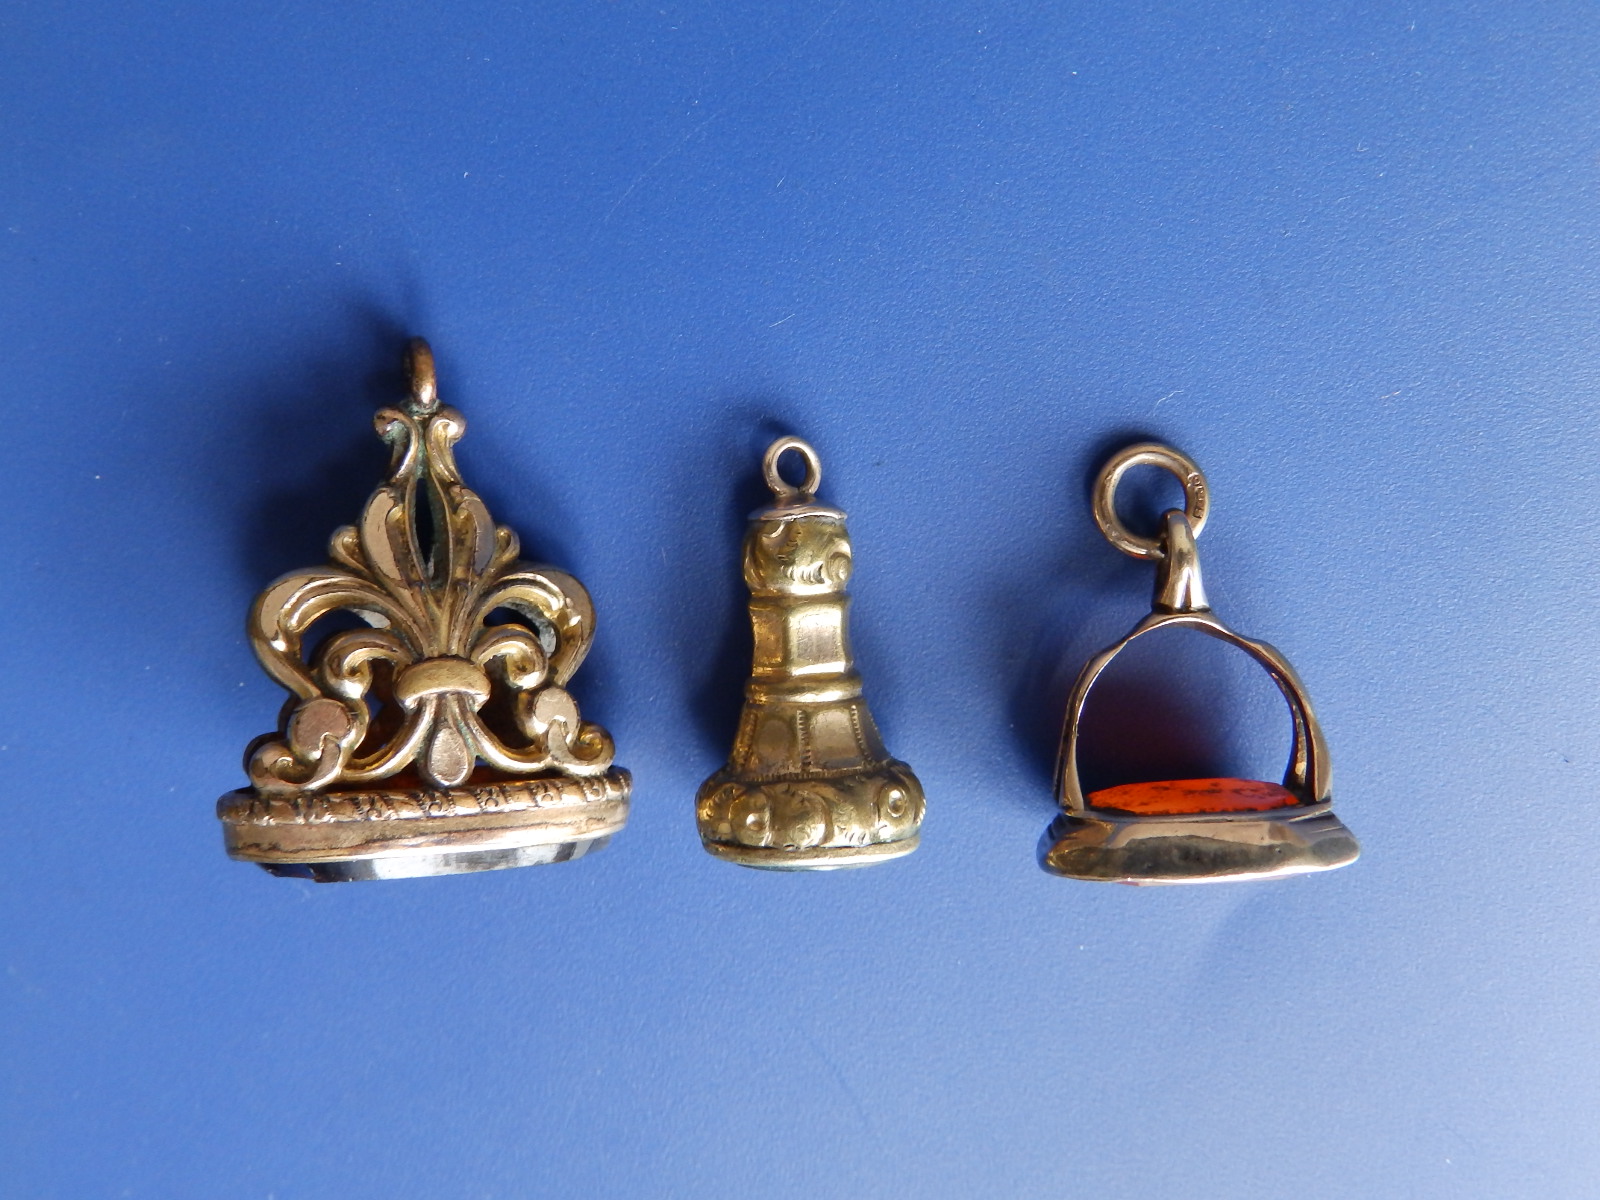 Three antique seal fob pendants, the largest 1.1" high having chips to the obsidian stone.